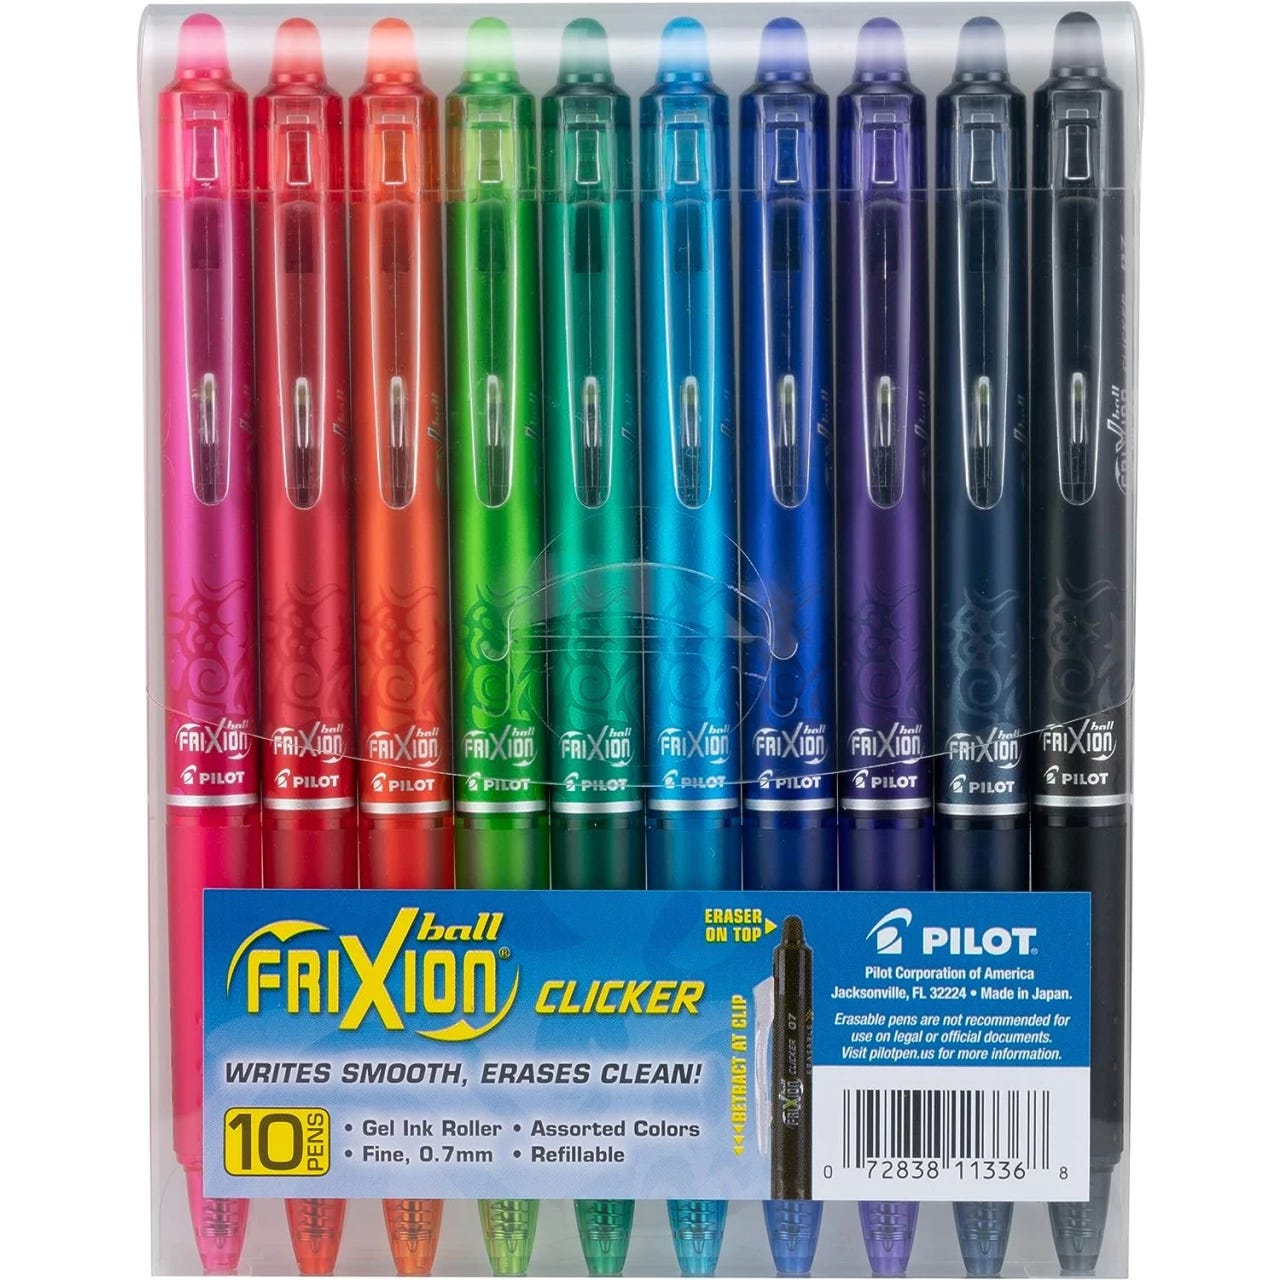 iBayam Journal Planner Pens Colored Pens Fine Point Markers Fine Tip  Drawing Pens Fineliner Pen for Journaling Writing Note Taking Calendar  Coloring Art Office Back to School Supplies, 18-Pack